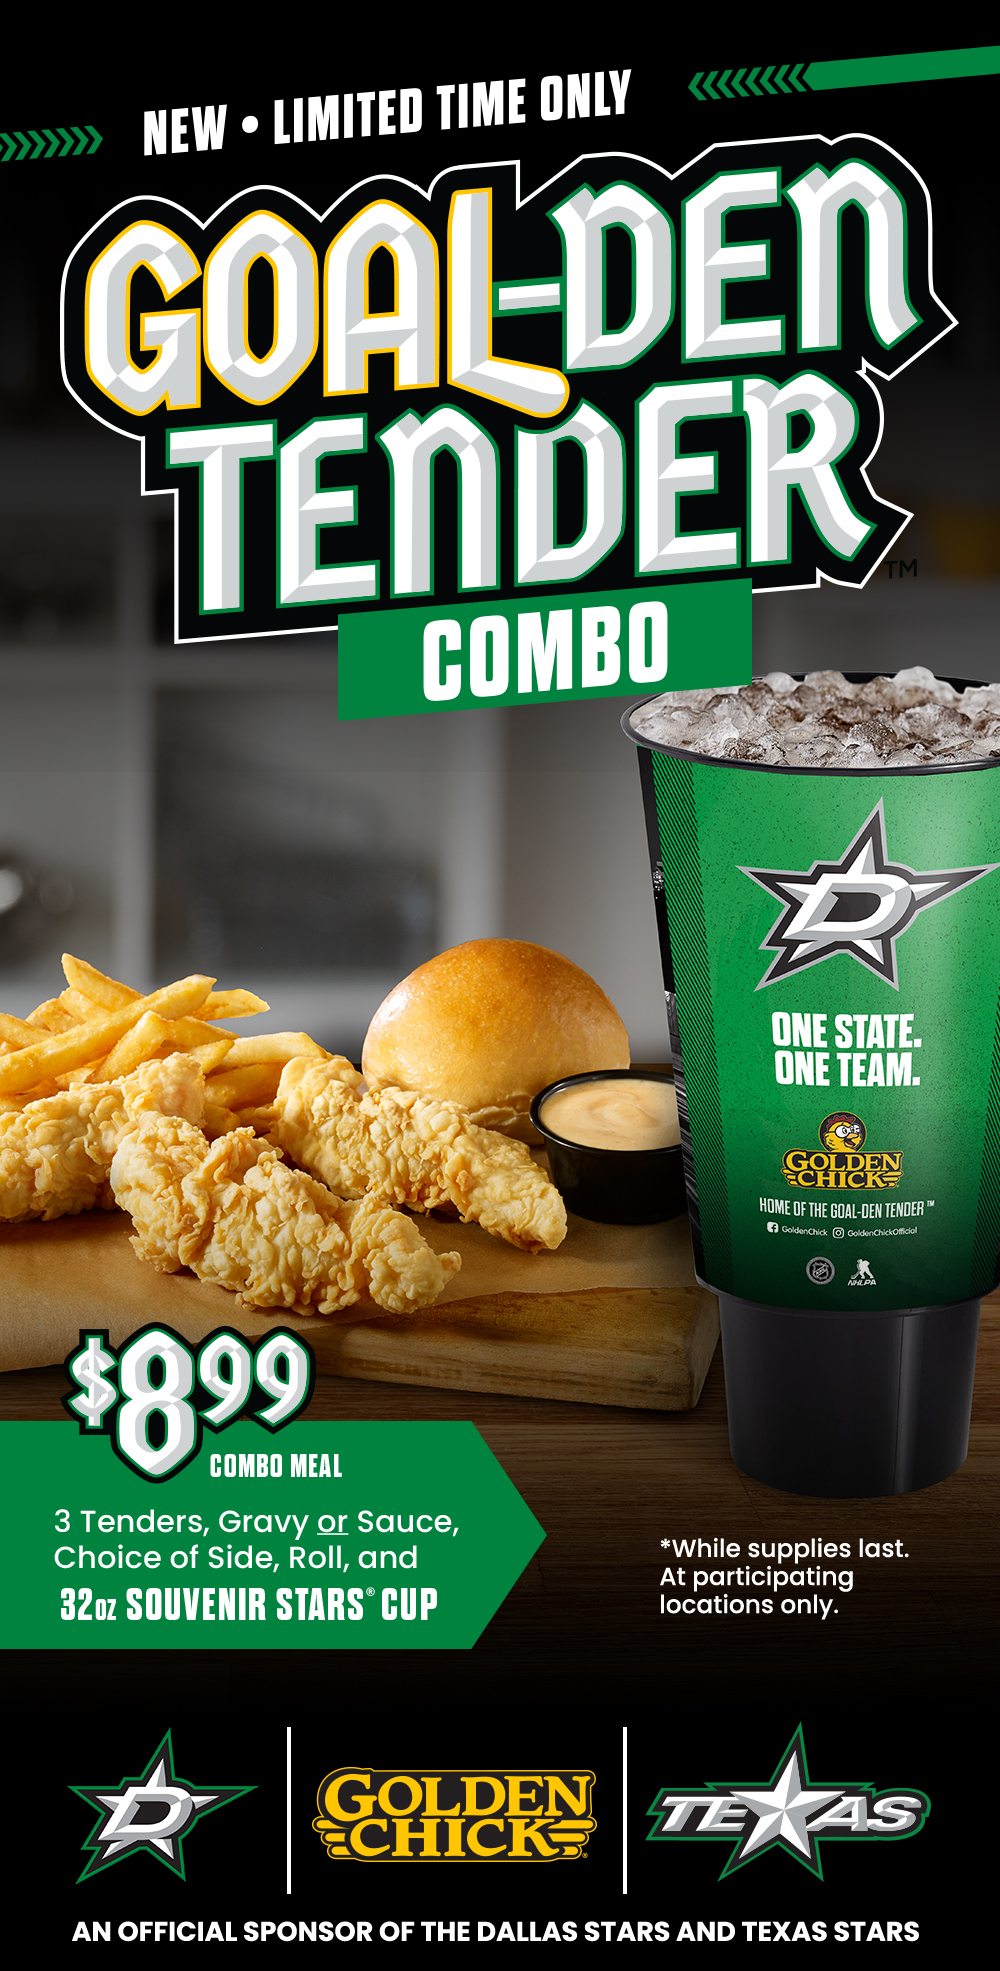 New - limited time only. Goal-den tender combo. $8.99 combo meal. 3 tenders, gravy or sauce, choice of side, roll, and 32 ounce souvenir Stars cup. While supplies last. At participating locations only. PROUD Sponsor of the Dallas and Texas Stars